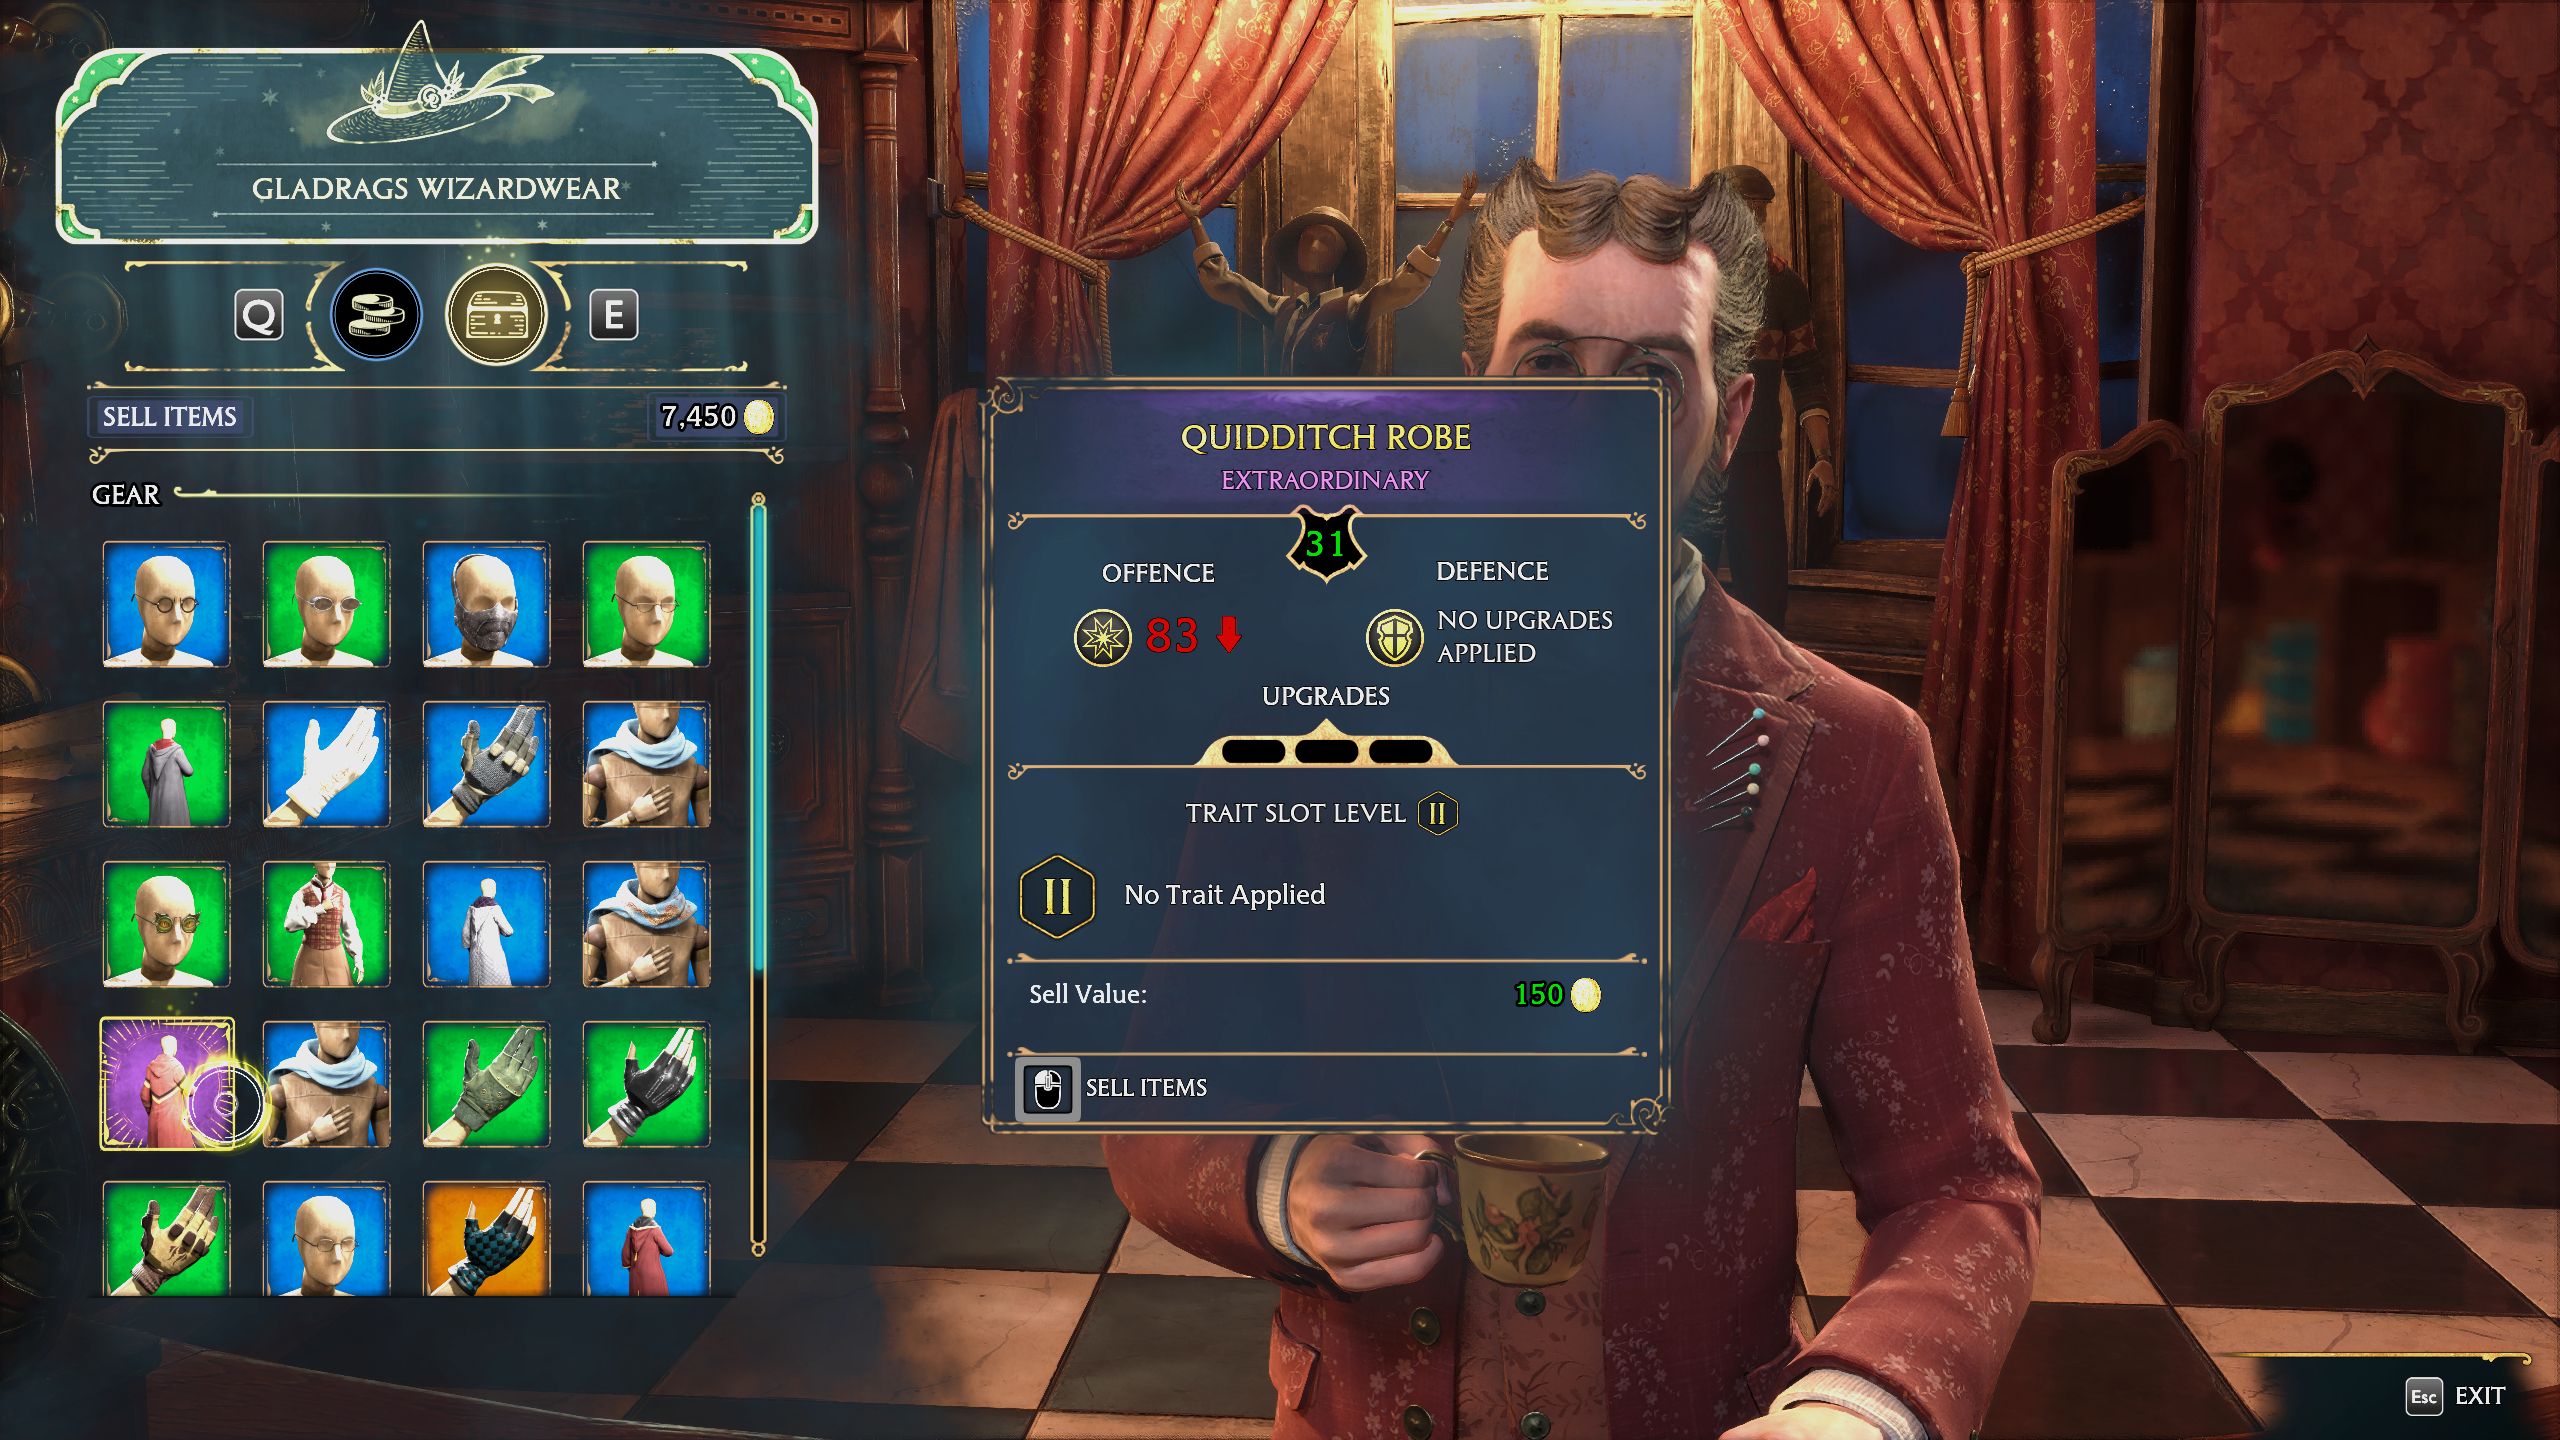 Hogwarts Legacy Player Selling Gear Items To Gladrags Wizardwear For Galleons